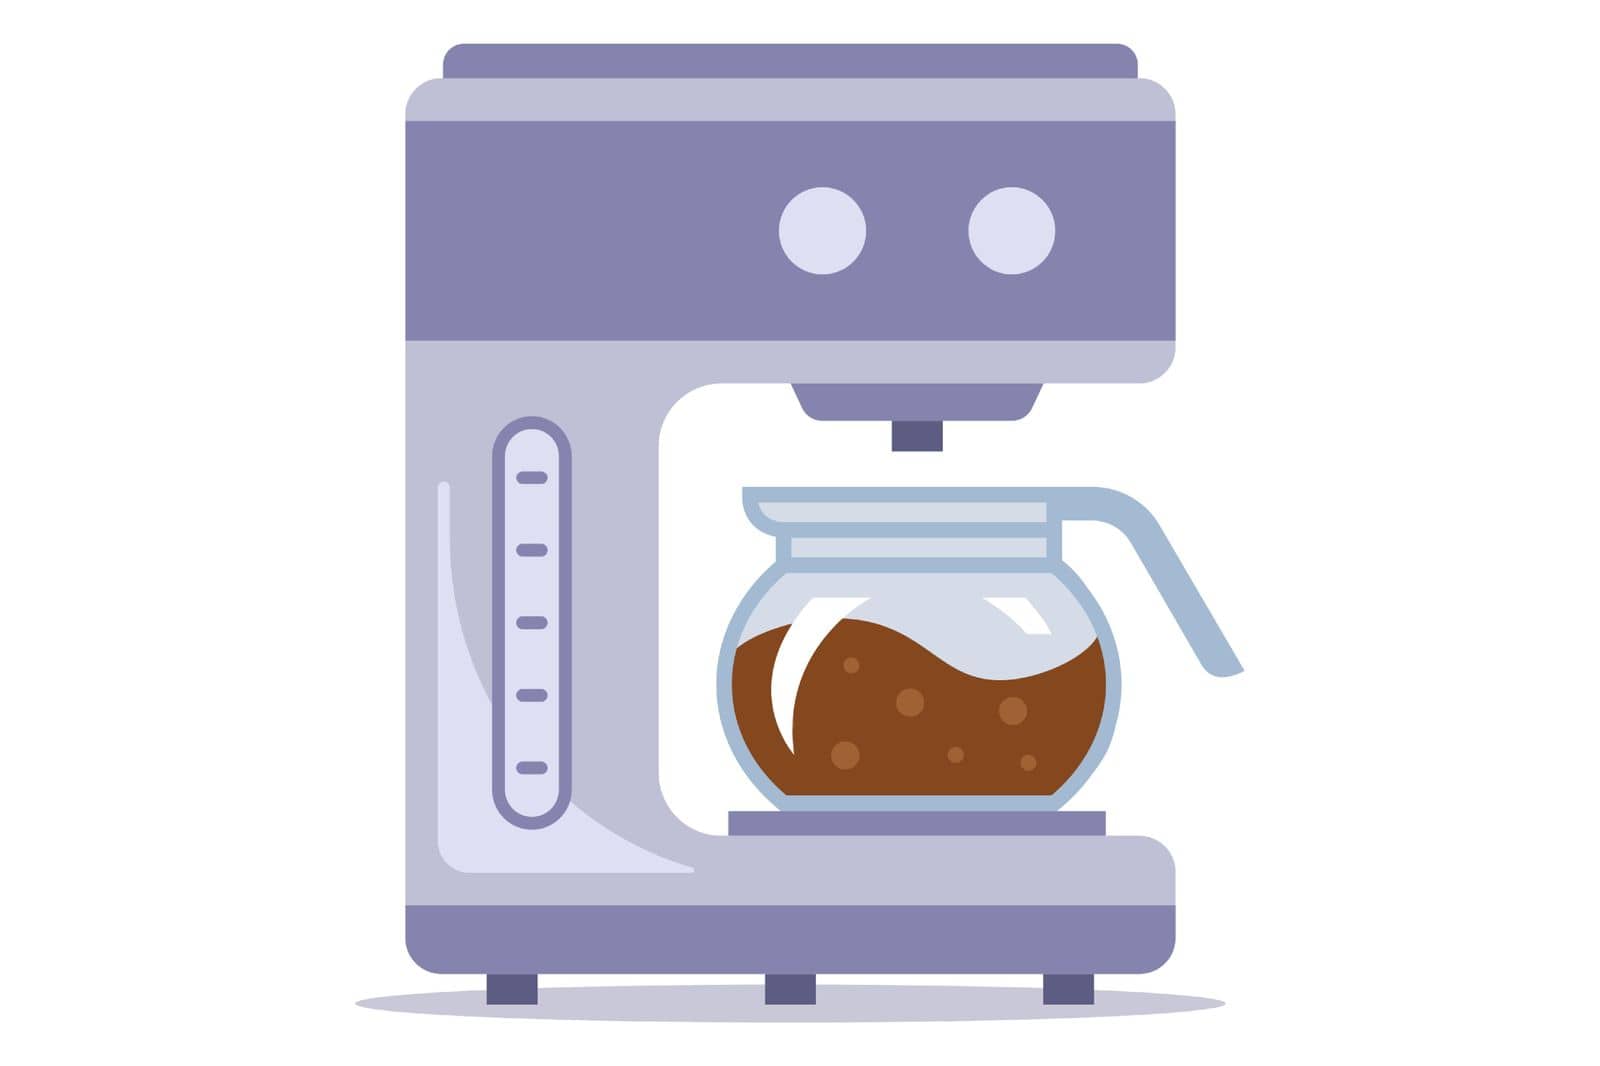 the coffee machine prepared ready-made hot coffee in the morning. flat vector illustration.